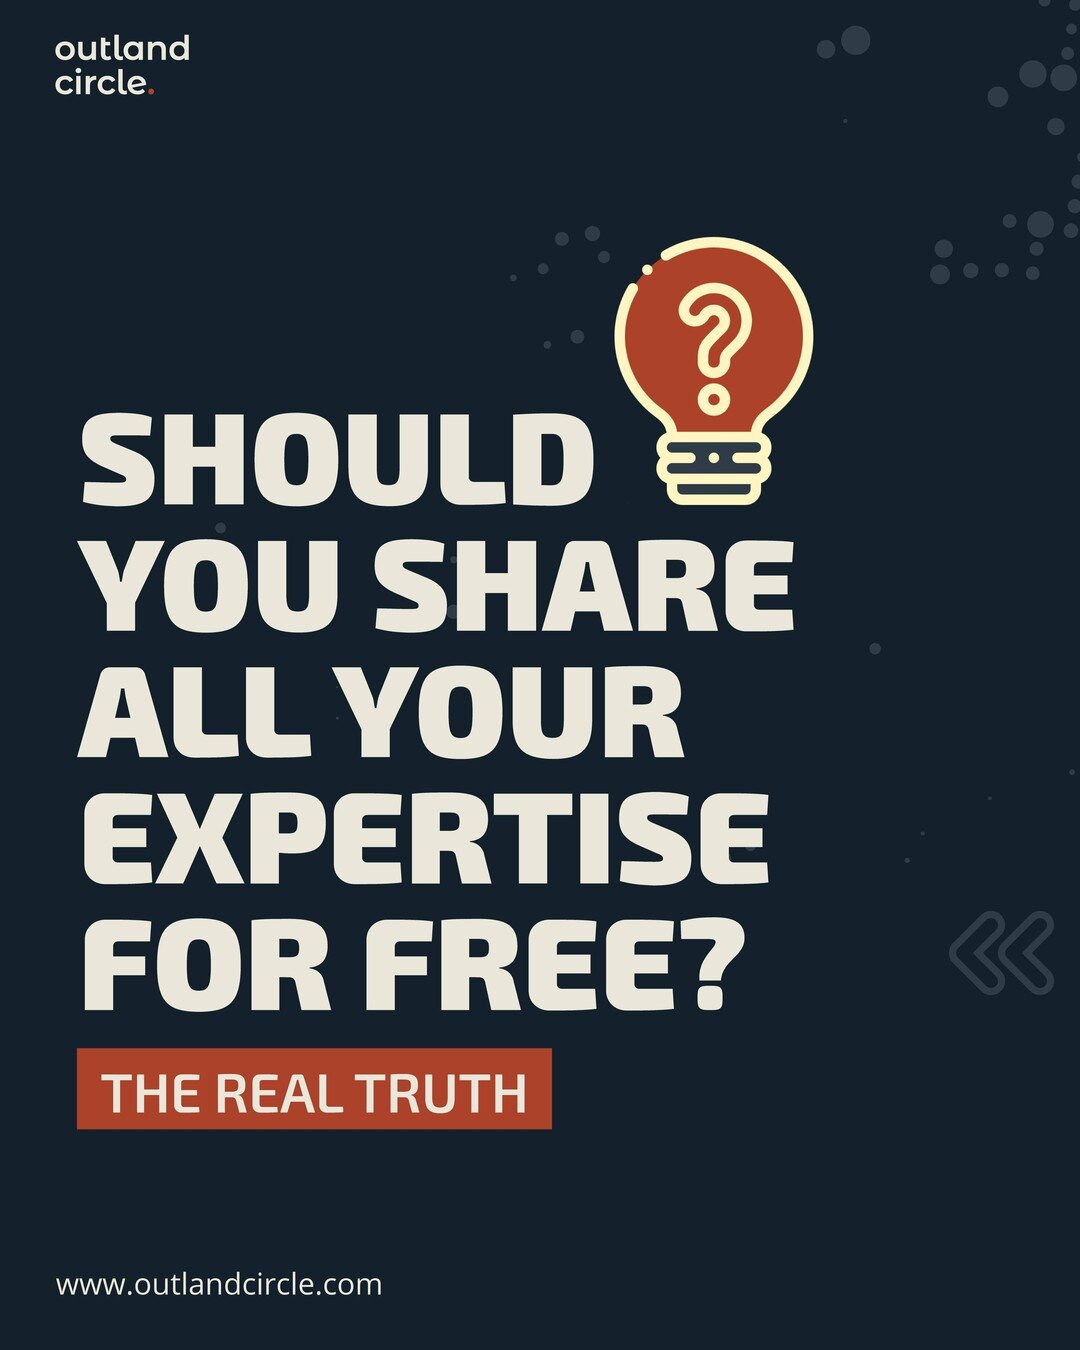 Should you give away the &quot;less important&quot; stuff for free and charge for the &quot;real information&quot;?

We talk a lot about sharing expertise on this page. Today, we elaborate on it.

If you enjoyed this post, give it a like ❤ It helps u